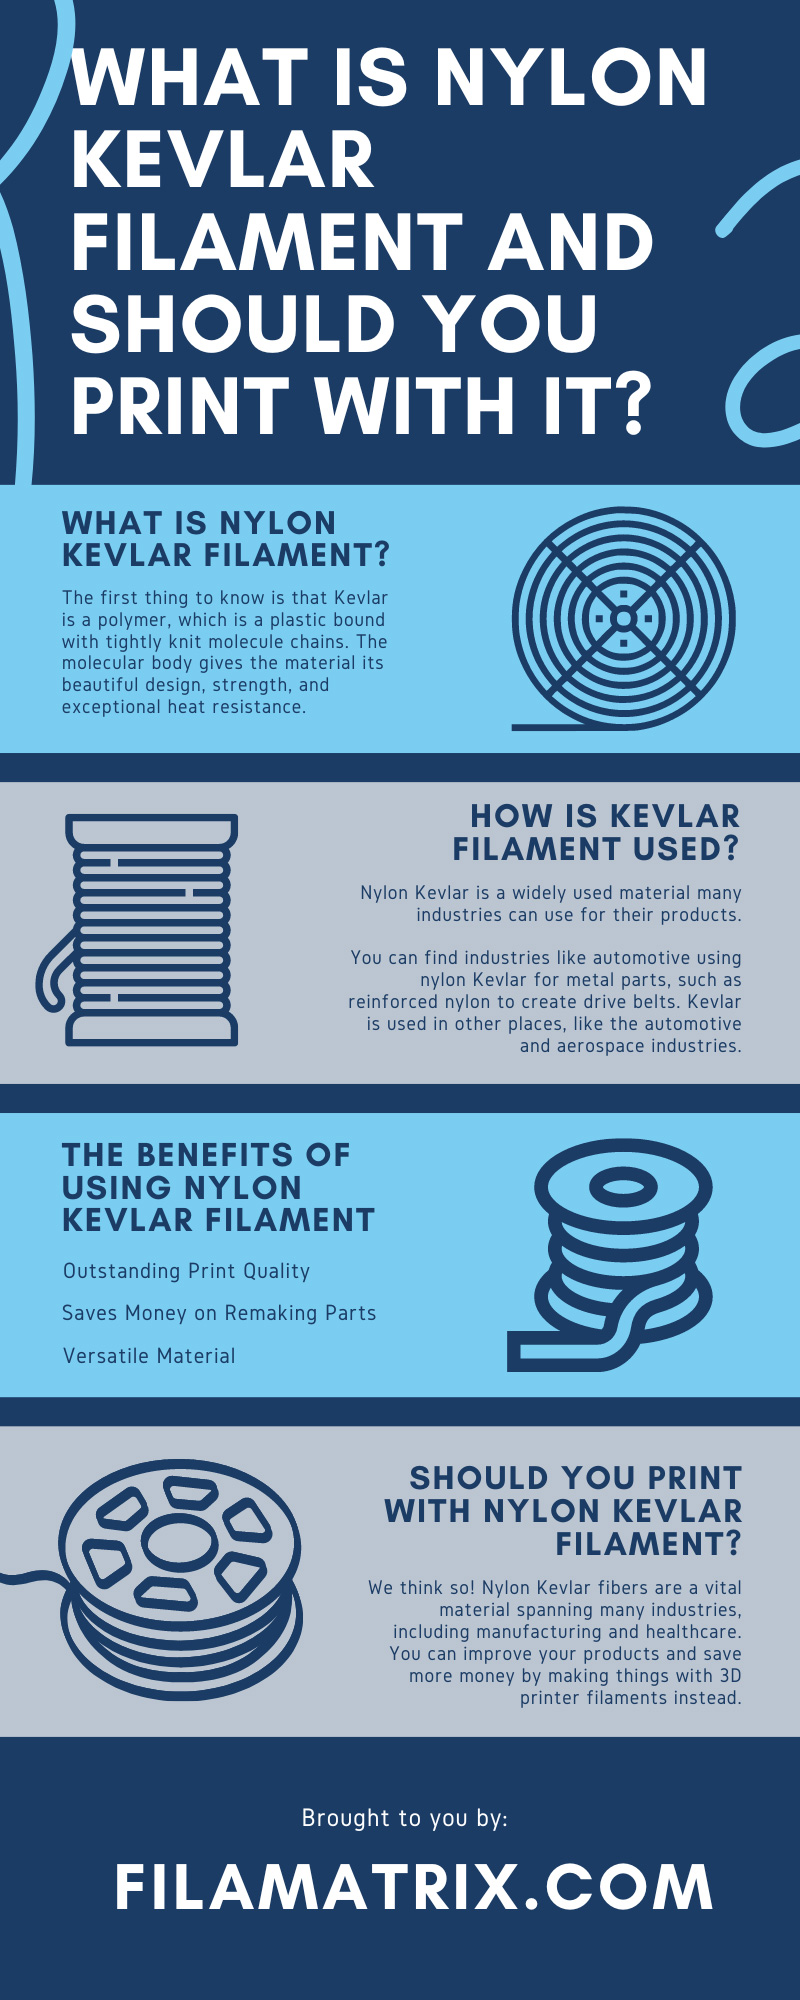 What Is Nylon Kevlar Filament and Should You Print With It?